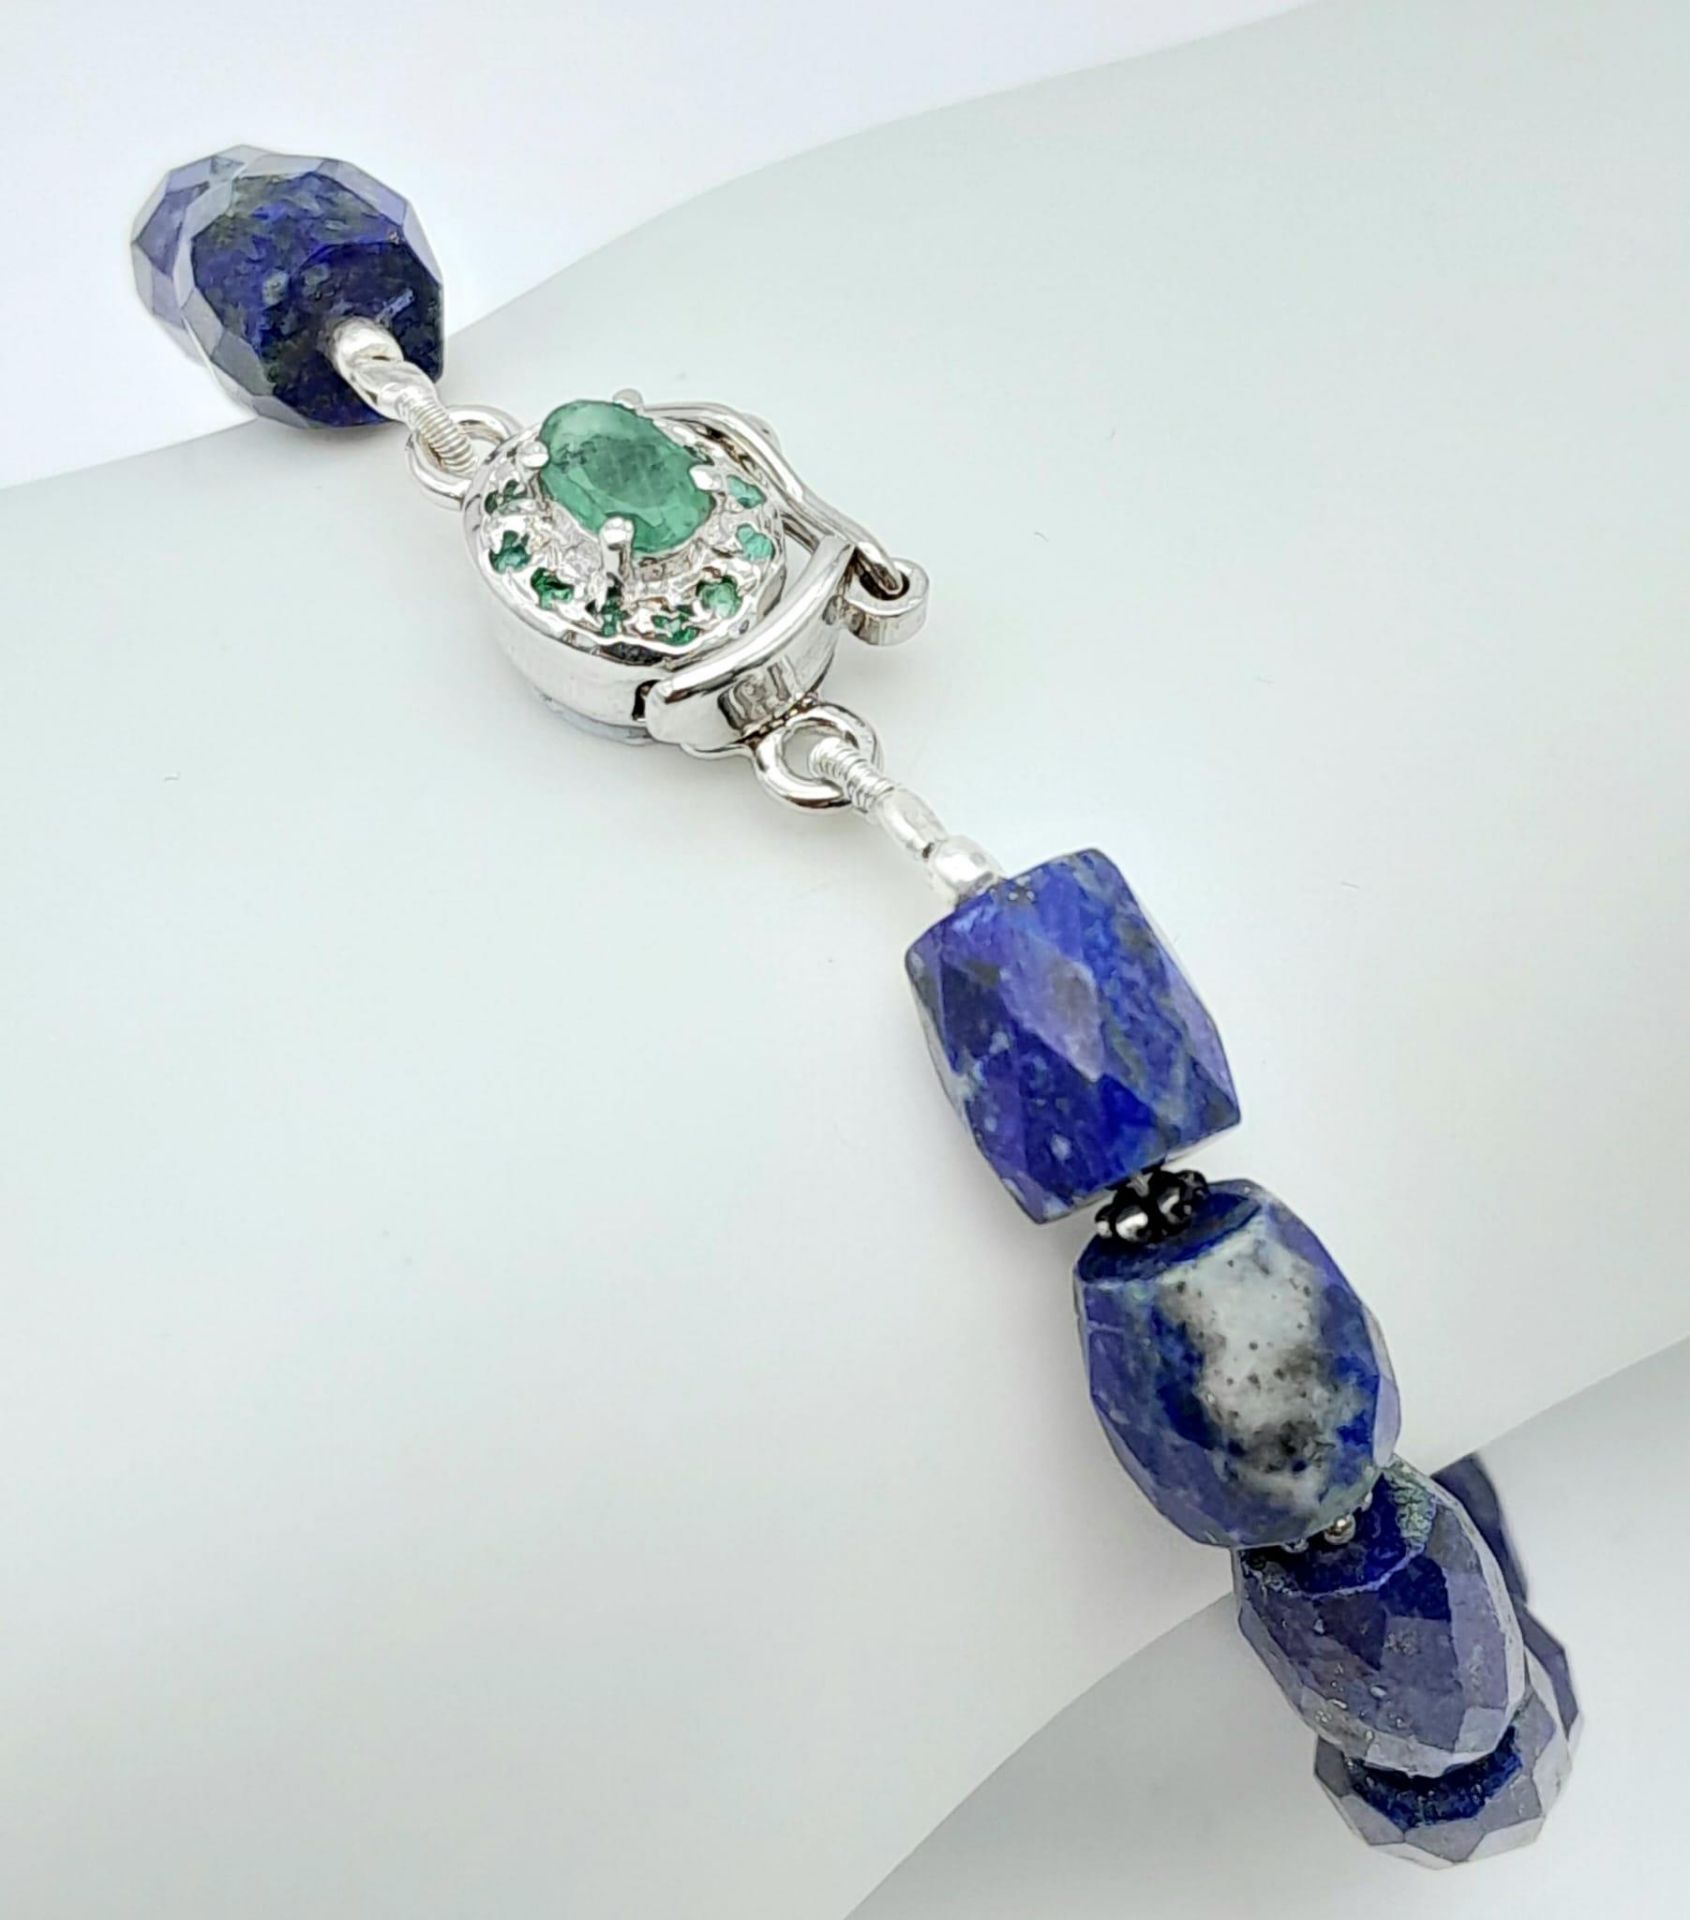 A Lapis Lazuli Bracelet with Emerald and 925 Silver Clasp. 110ctw. 20.5cm length, 22.57g total - Image 2 of 5